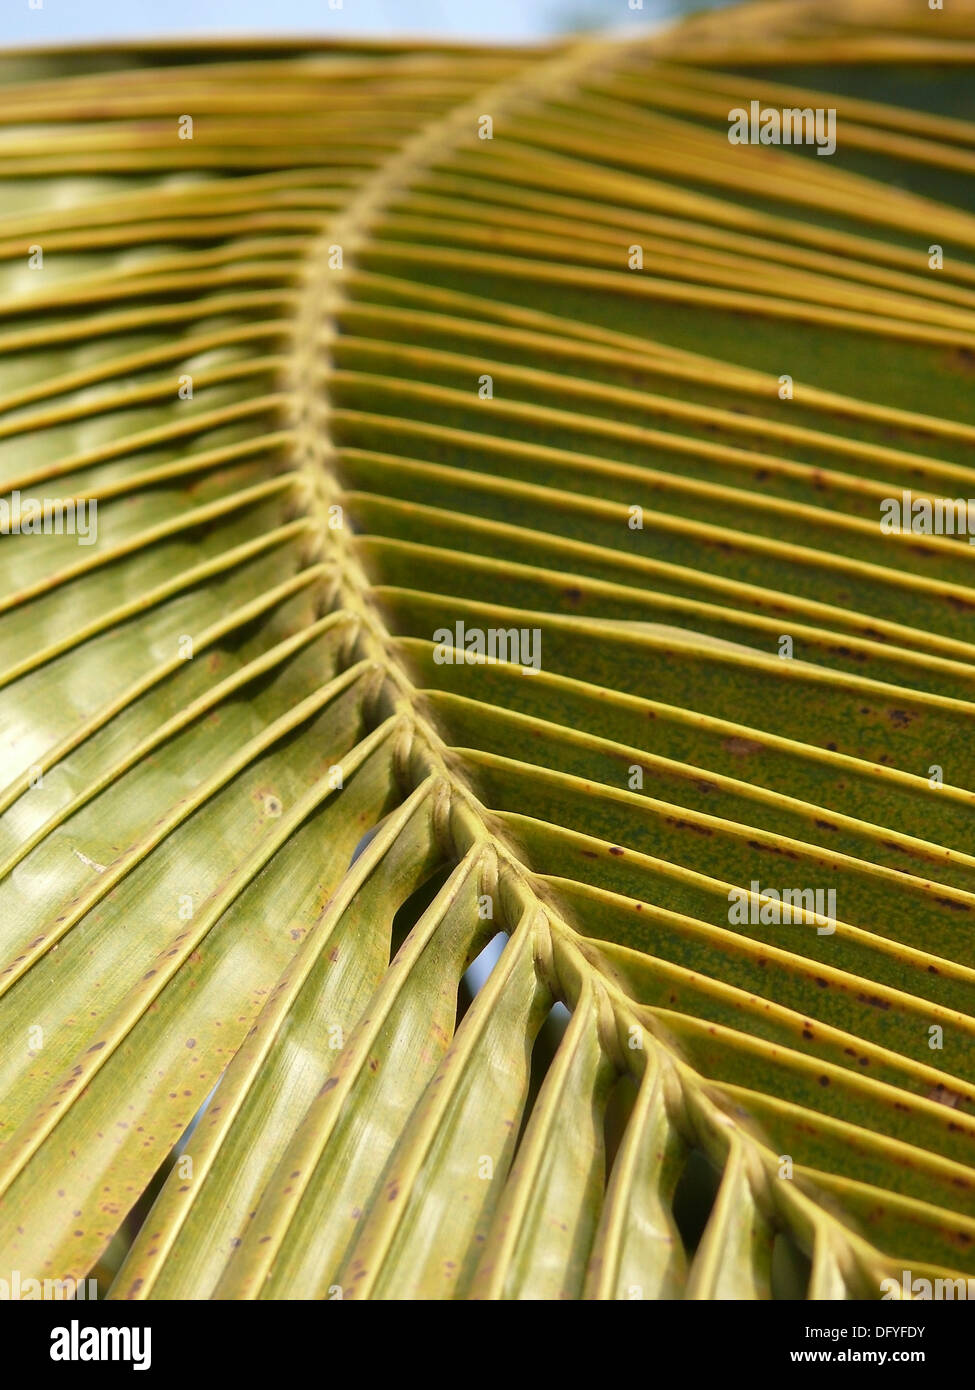 Coconut palm frond Stock Photo